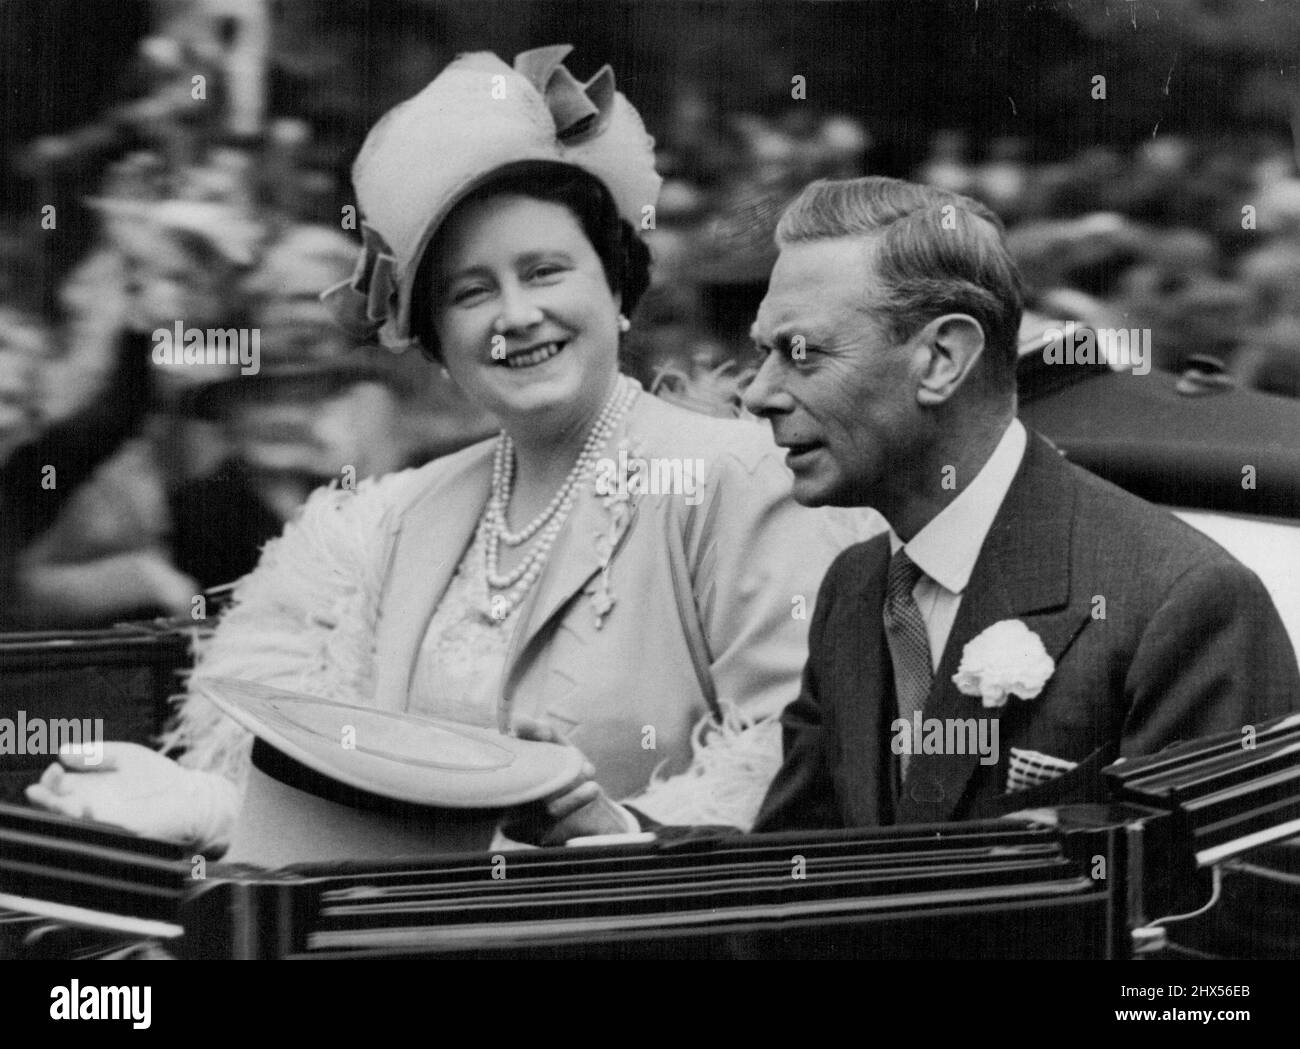 King and Queen At Ascot -- Their Majesties the King and Queen pictured in the leading carriage of the royal procession which was the traditional prelude to the second day of the Royal Ascot Meeting on the Famous Berkshire Racecourse Today, June 16. June 29, 1948. (Photo by Associated Press Photo) Stock Photo